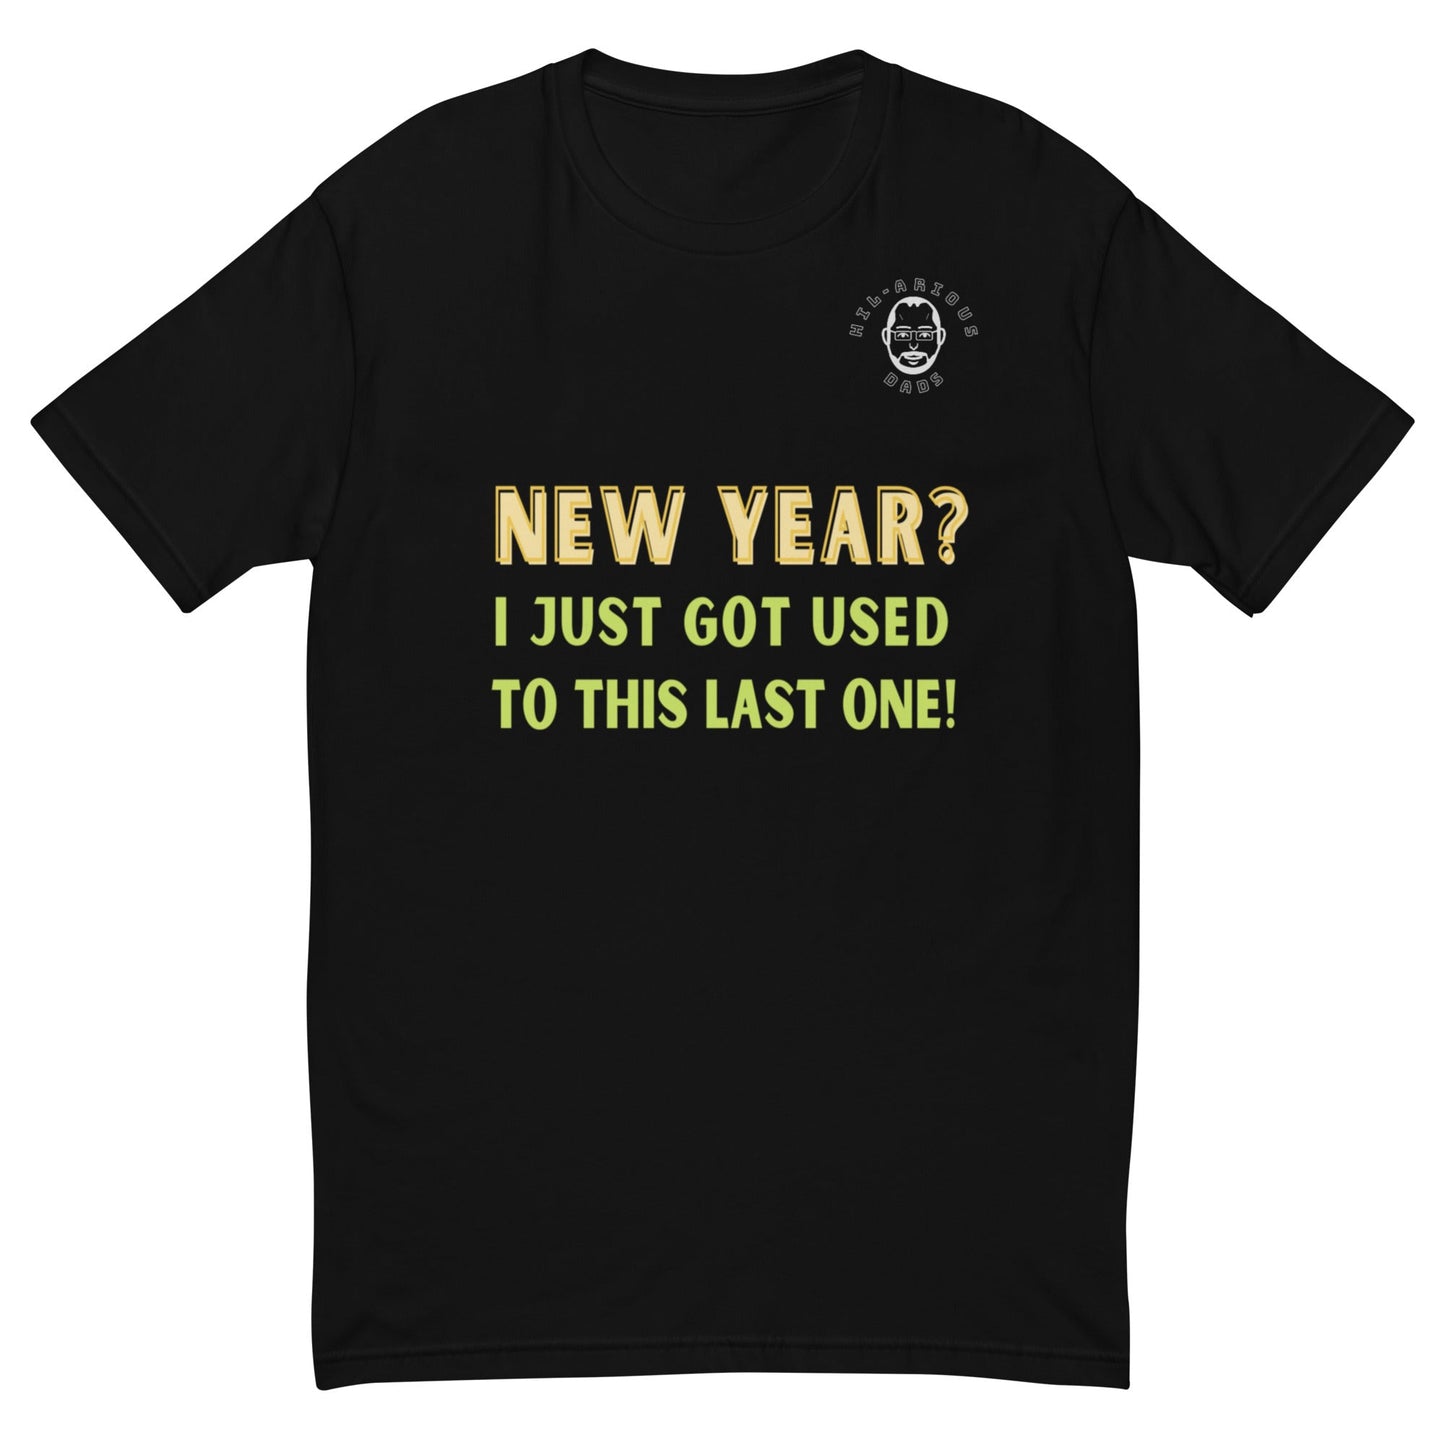 New Year? I just got used to this last one!-T-shirt - Hil-arious Dads